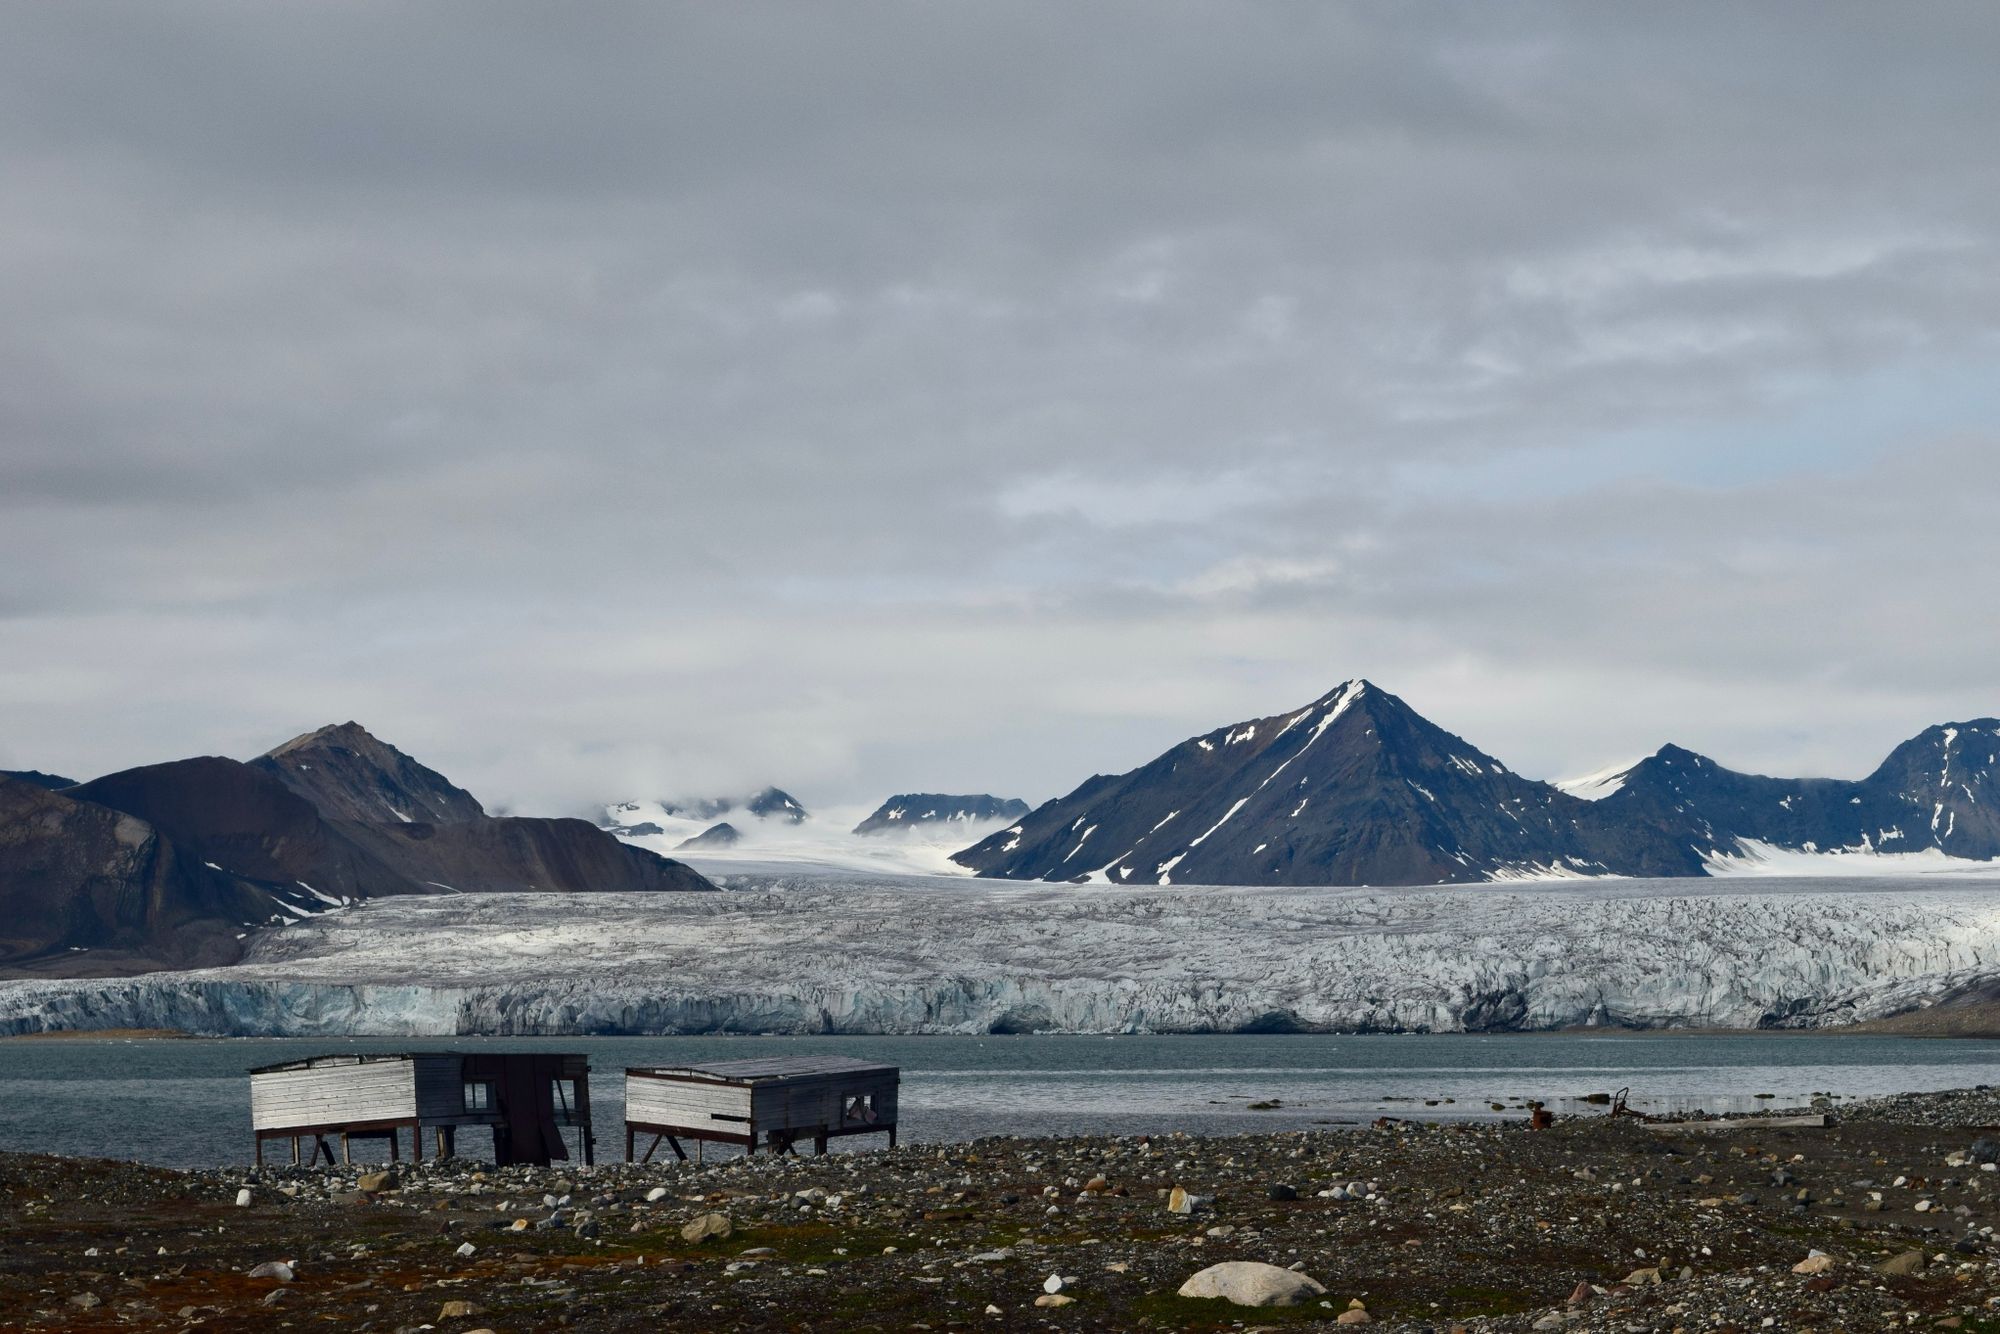 A panorama of the Esmark Glacier and Spitsbergen's snow-dappled mountains, with wooden structures in the foreground.